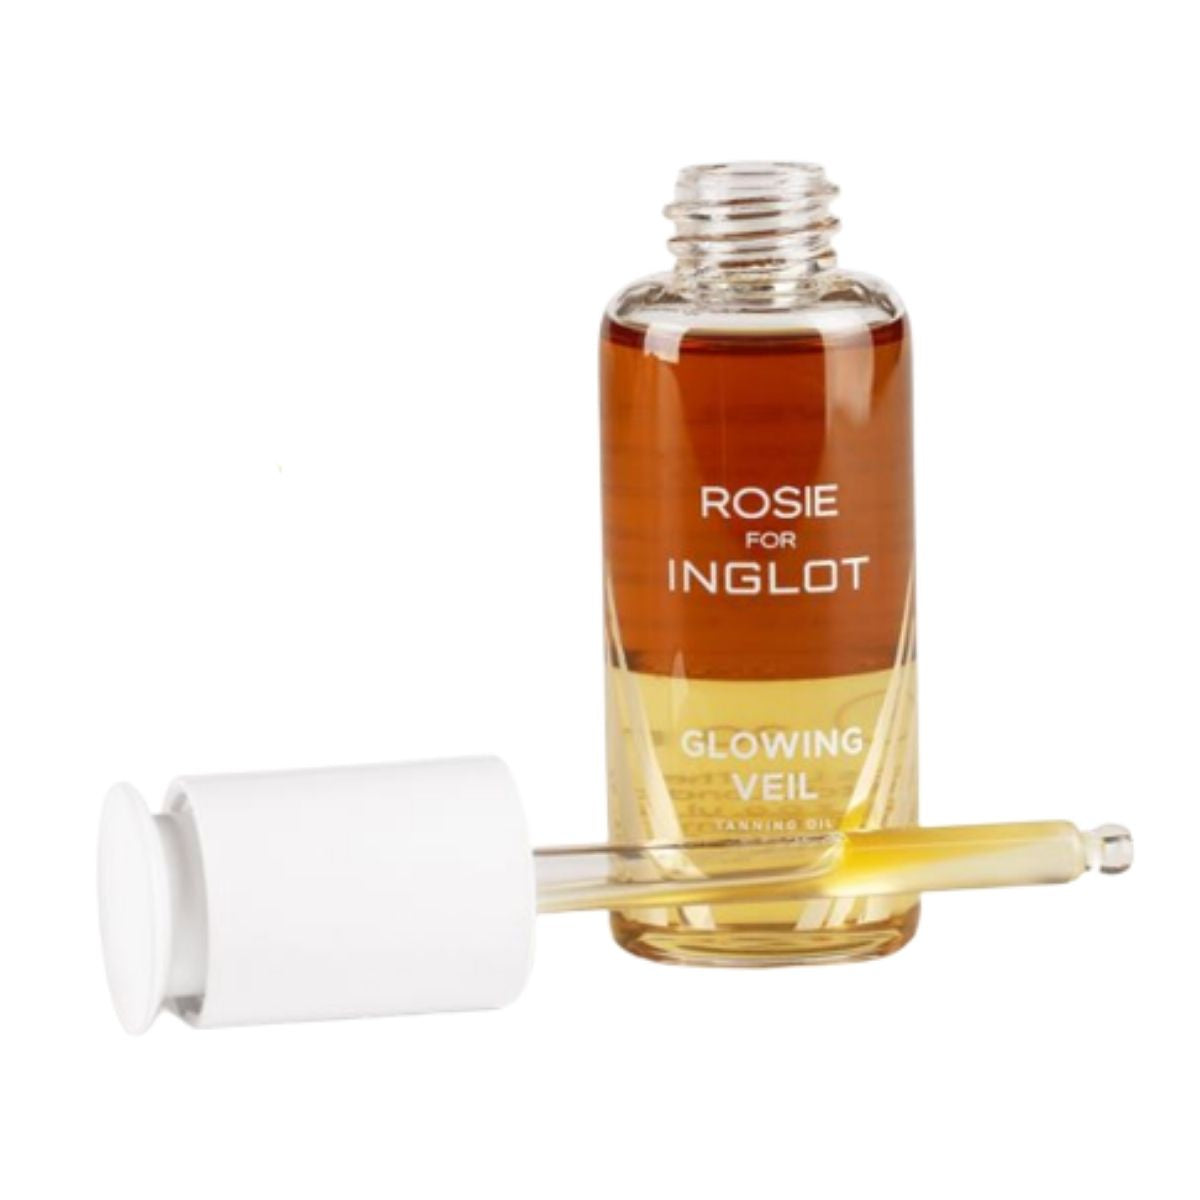 Rose For Inglot Glowing Veil Tanning Oil - Give Us Beauty